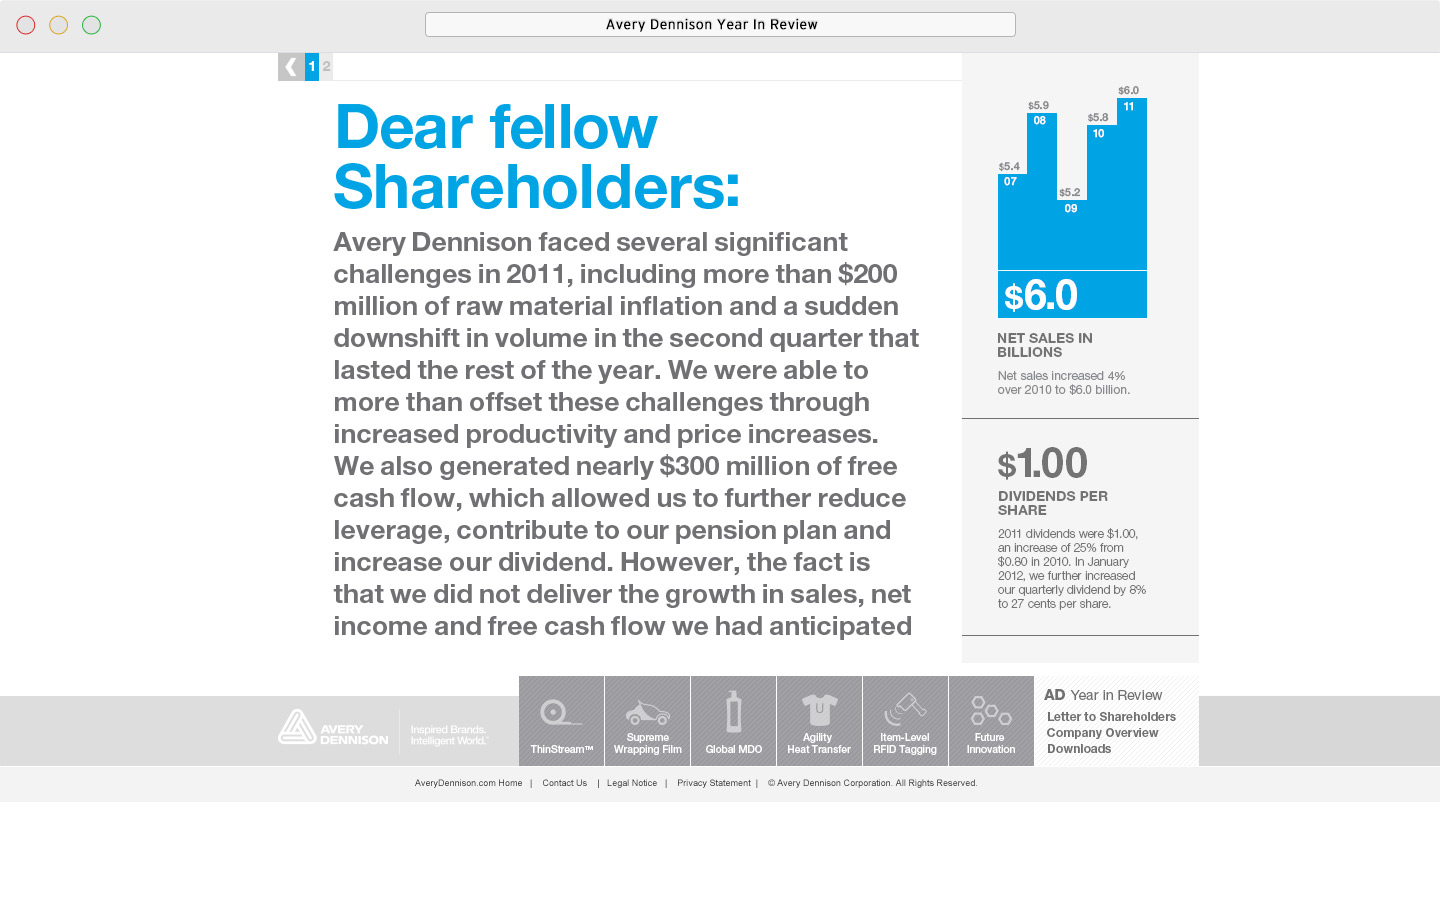 Avery Dennison 2011 Online Year In Review Letter to Shareholders